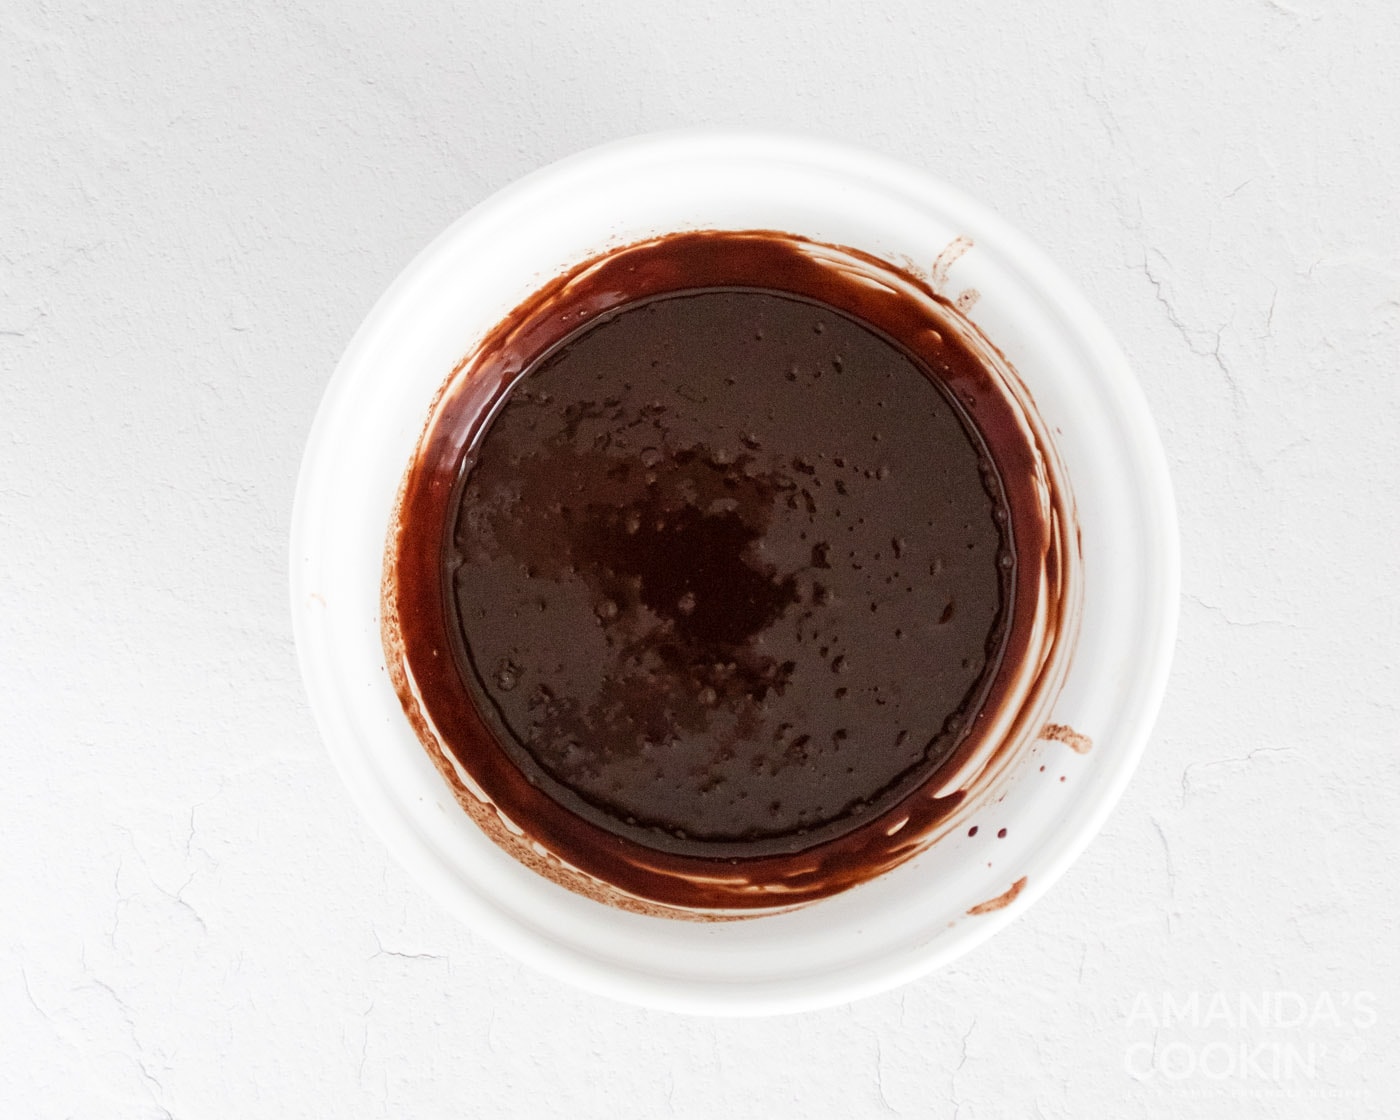 melted coconut oil and chocolate mixed in a bowl